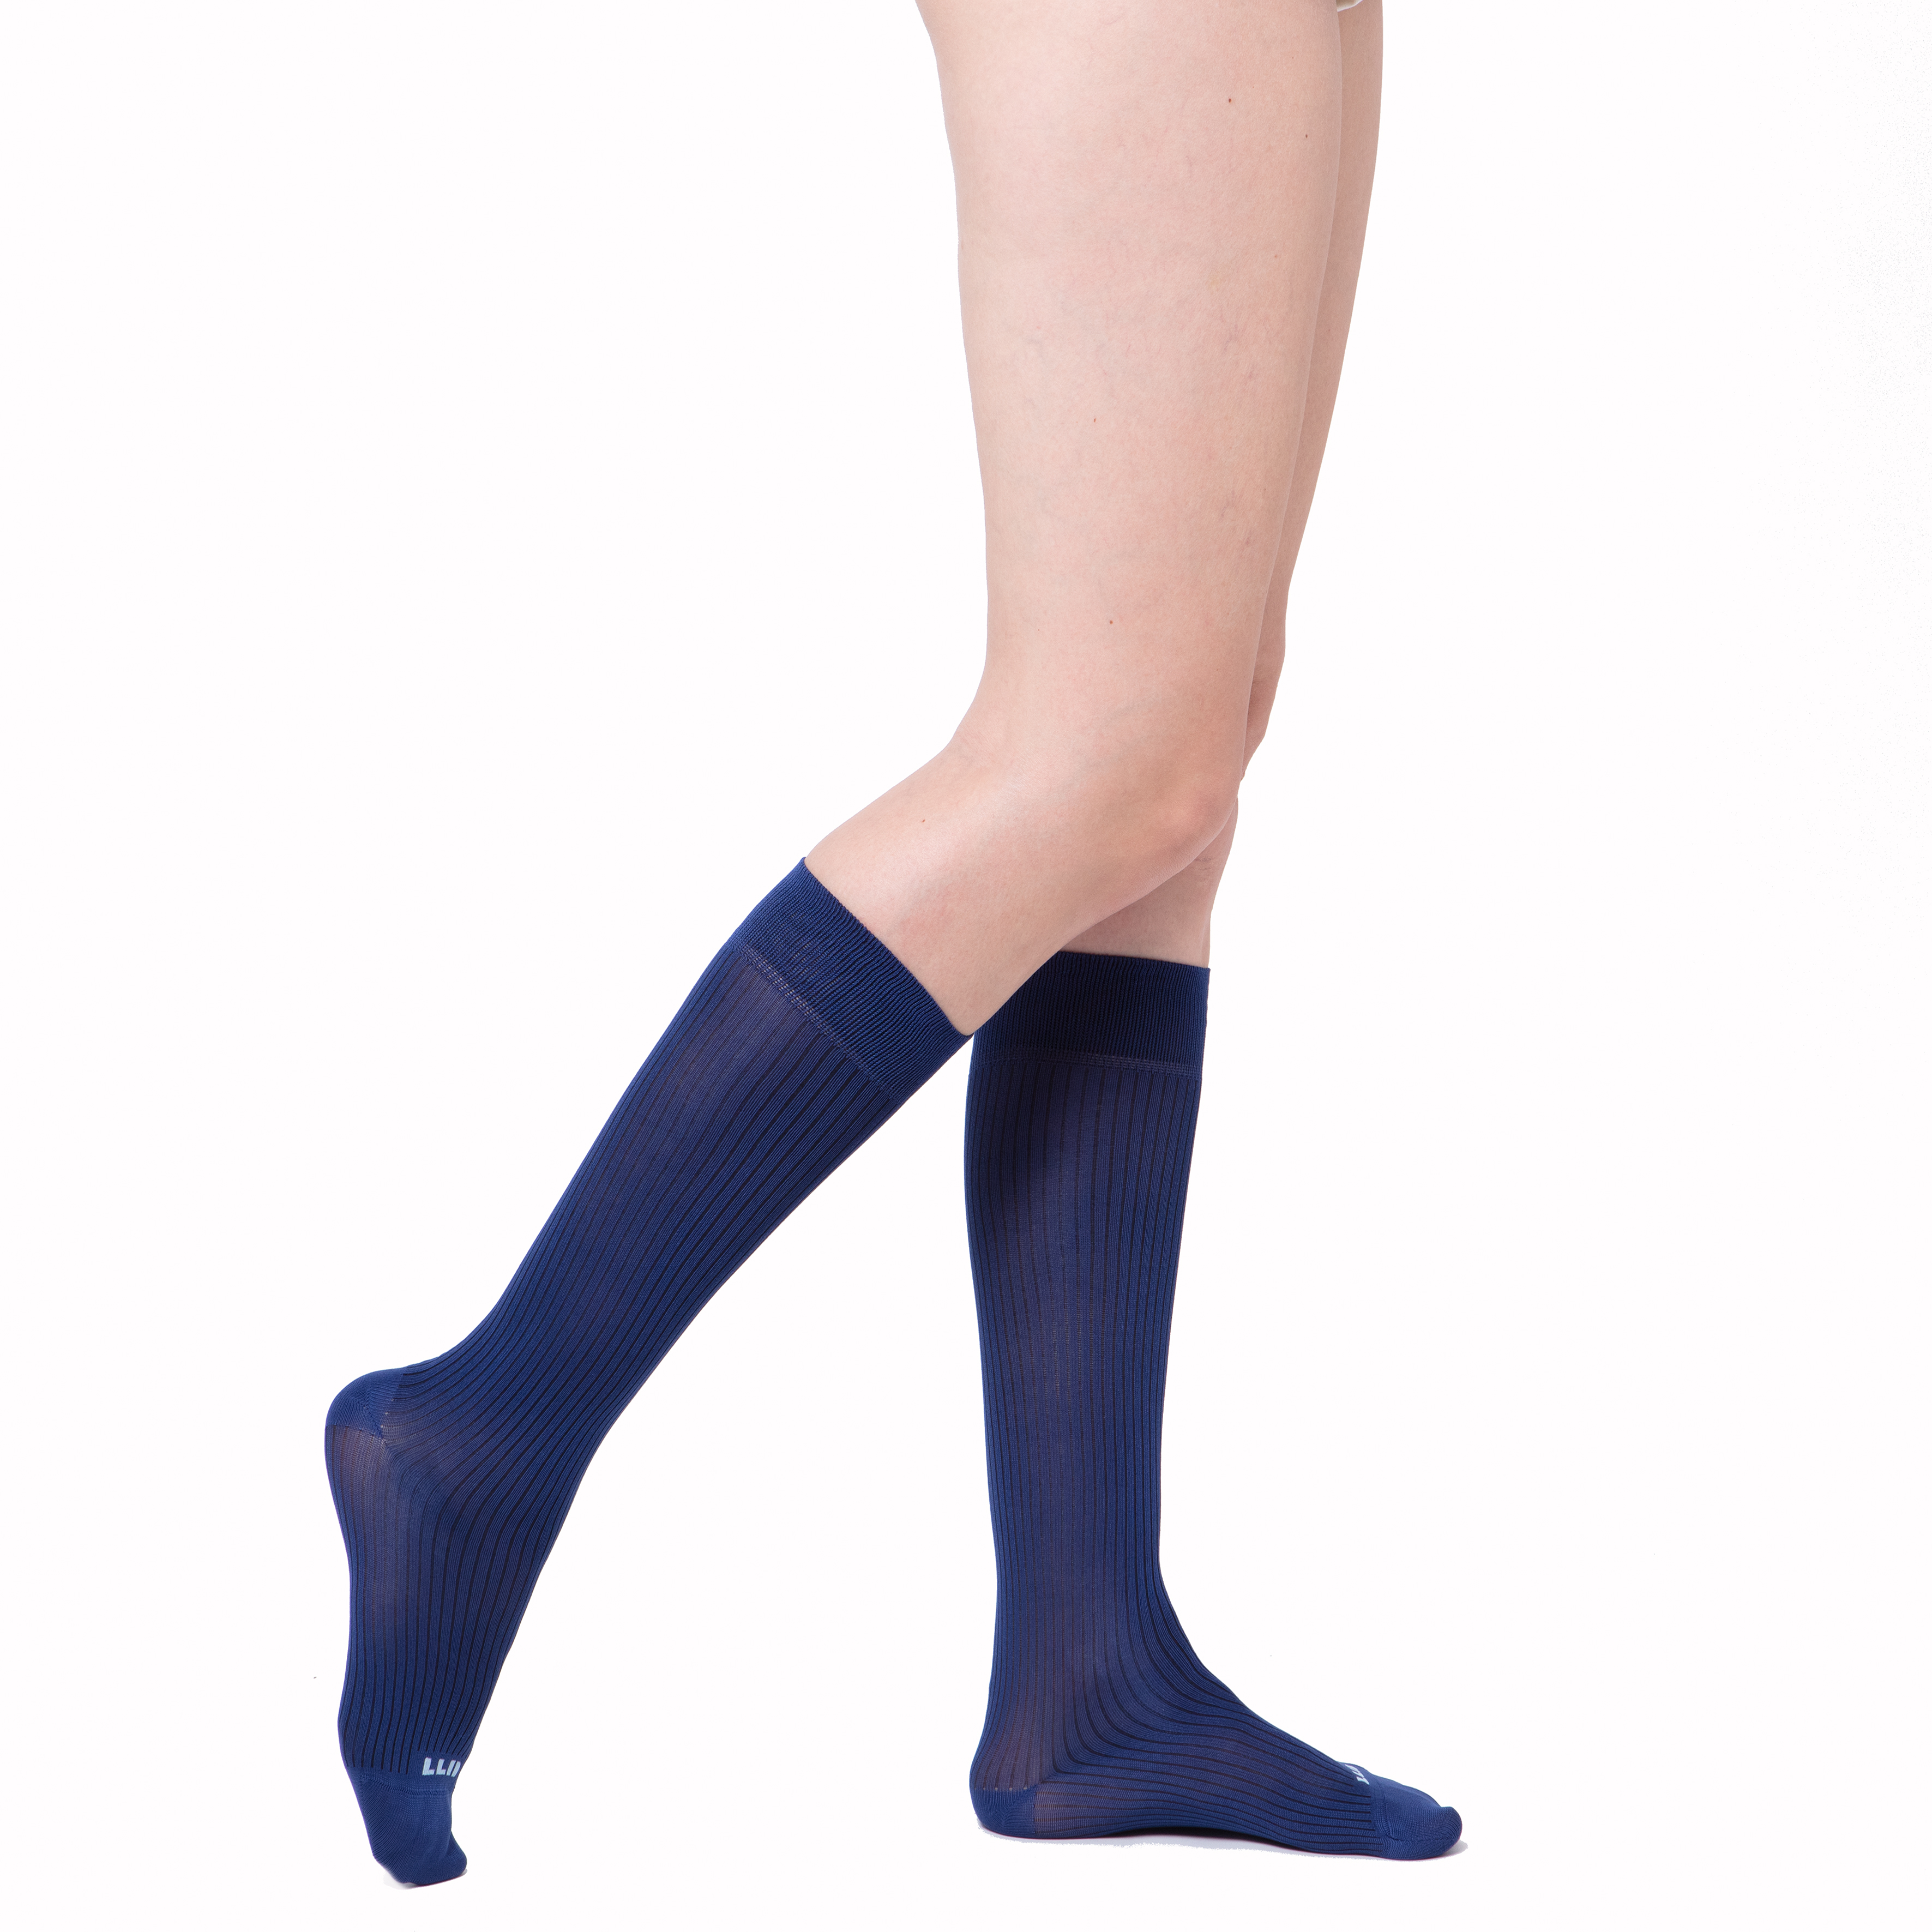  The Rib Collection Multipack – 5 Pairs of Knee-High